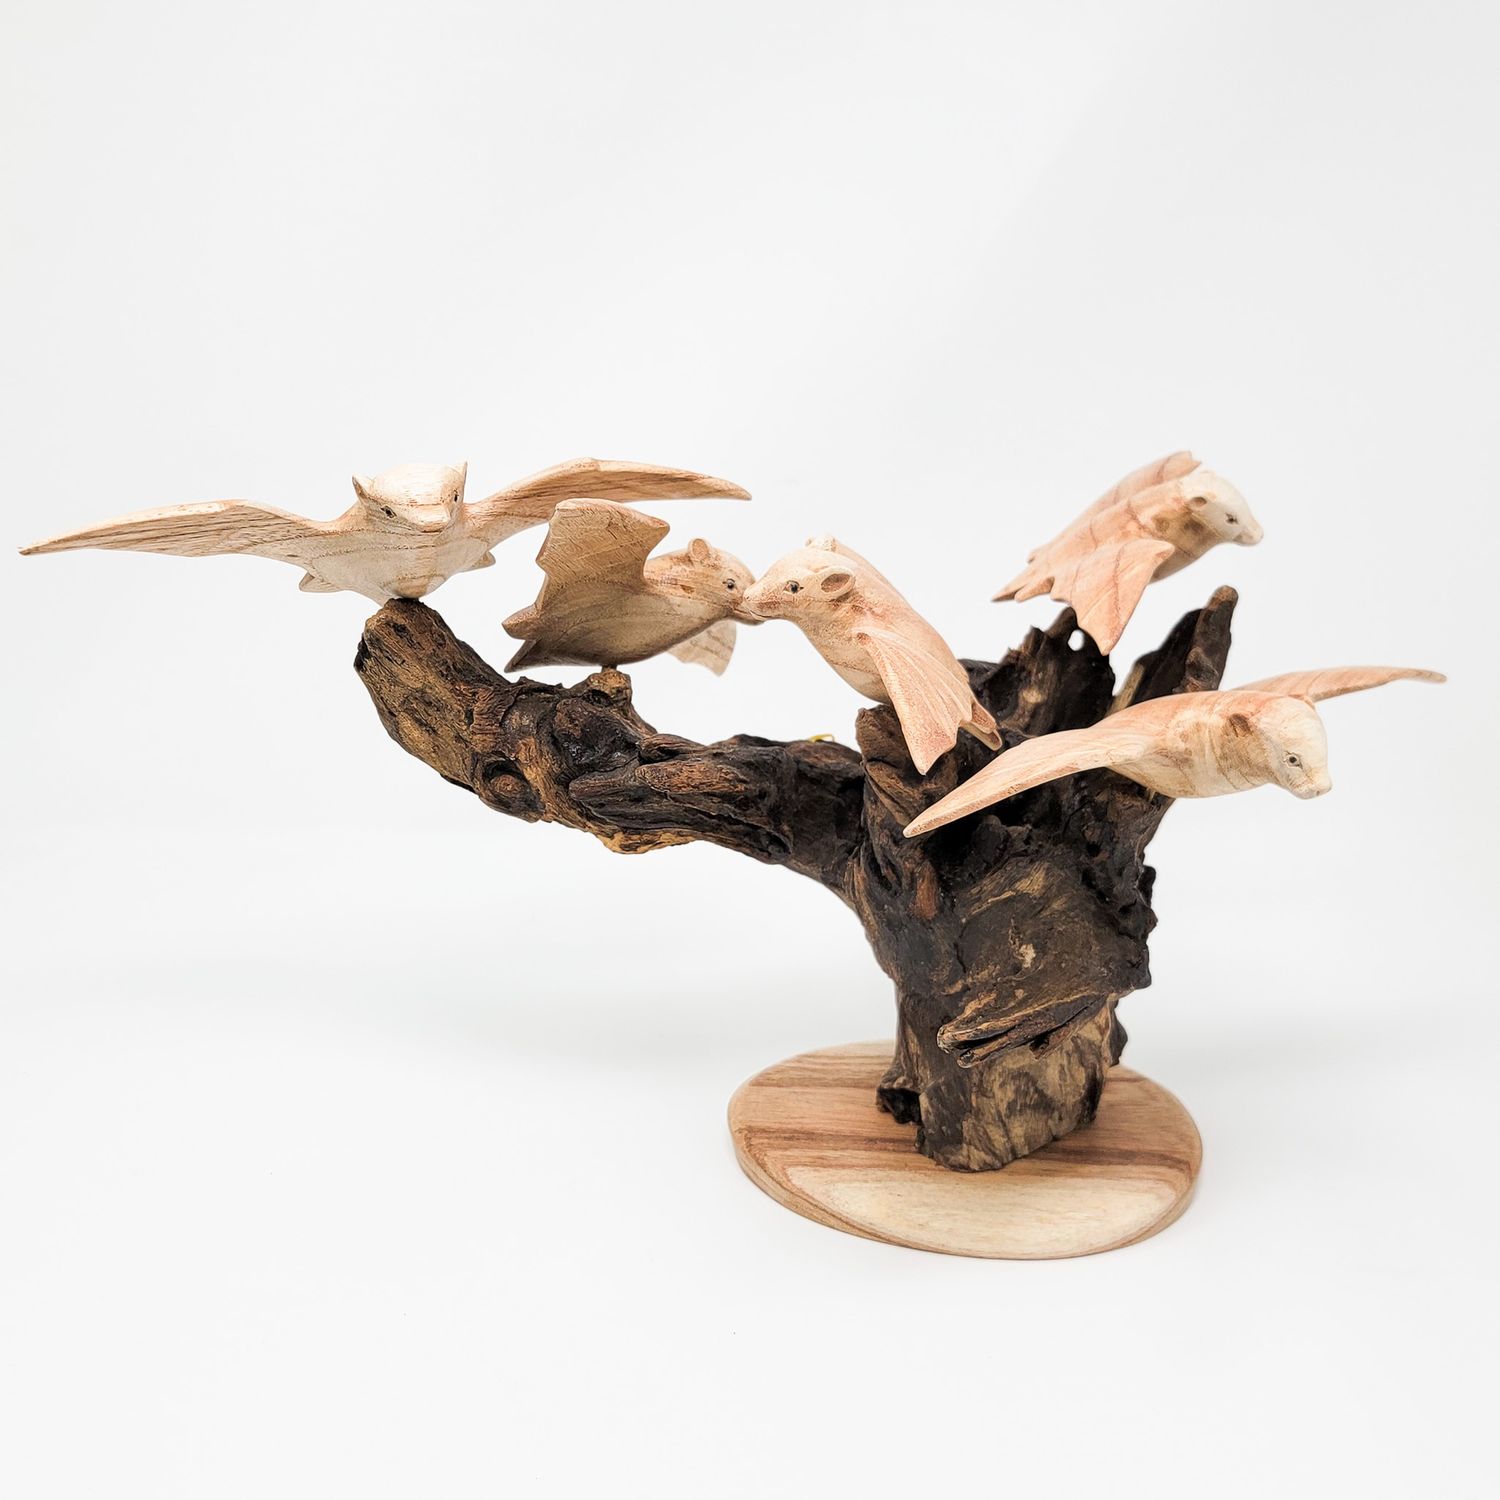 BATS 5 PC FAMILY STATUE WITH PARASITE WOOD BASE 1860, Item #: 1860, Alternate Lookup: BTN17-263, Vendor Stock #: TIN 595 14in 35cm